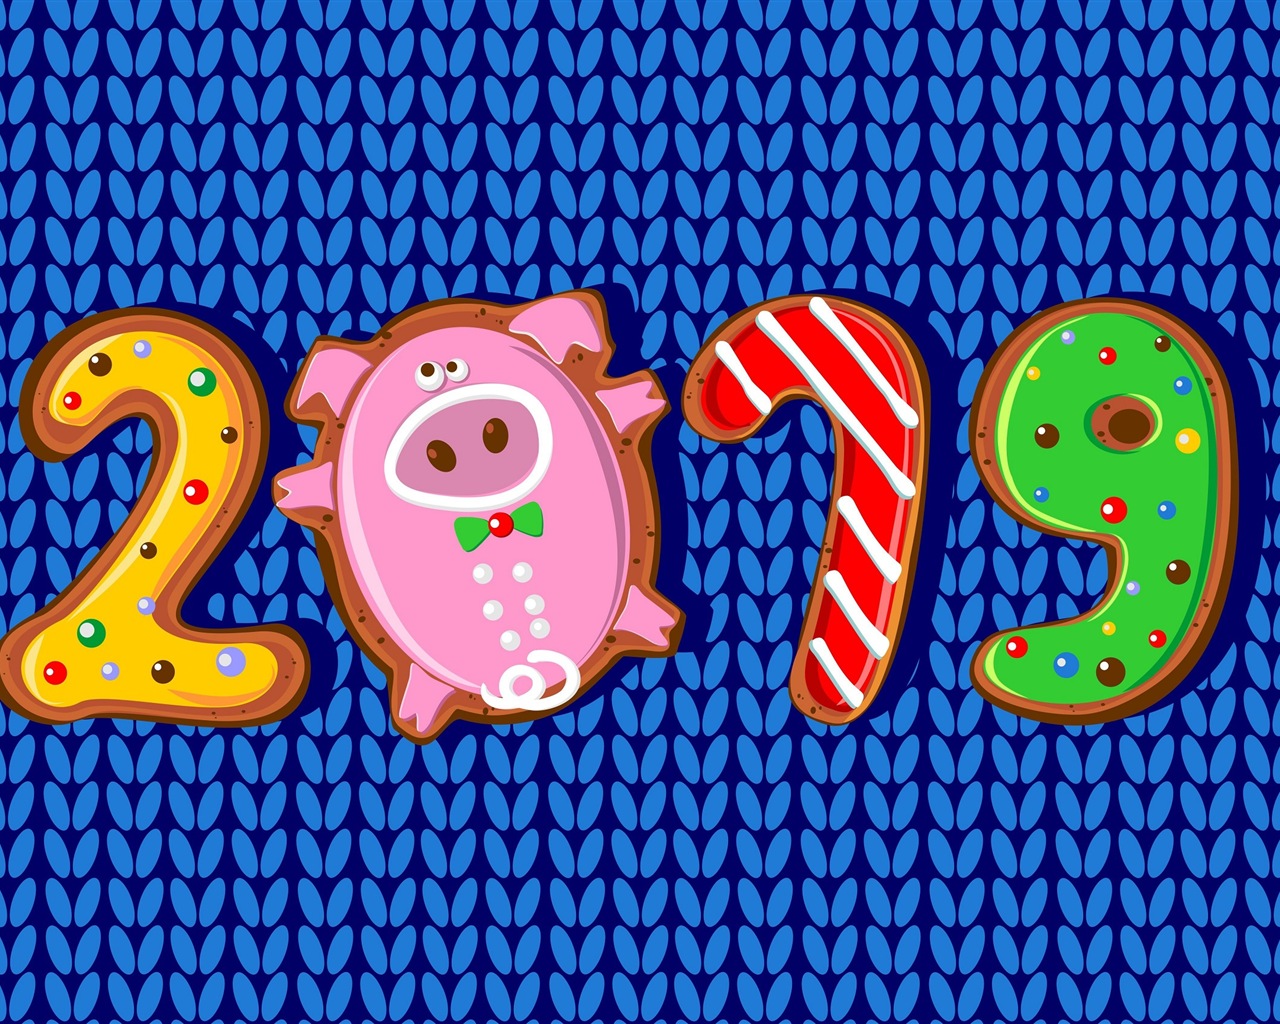 Happy New Year 2019 HD wallpapers #15 - 1280x1024